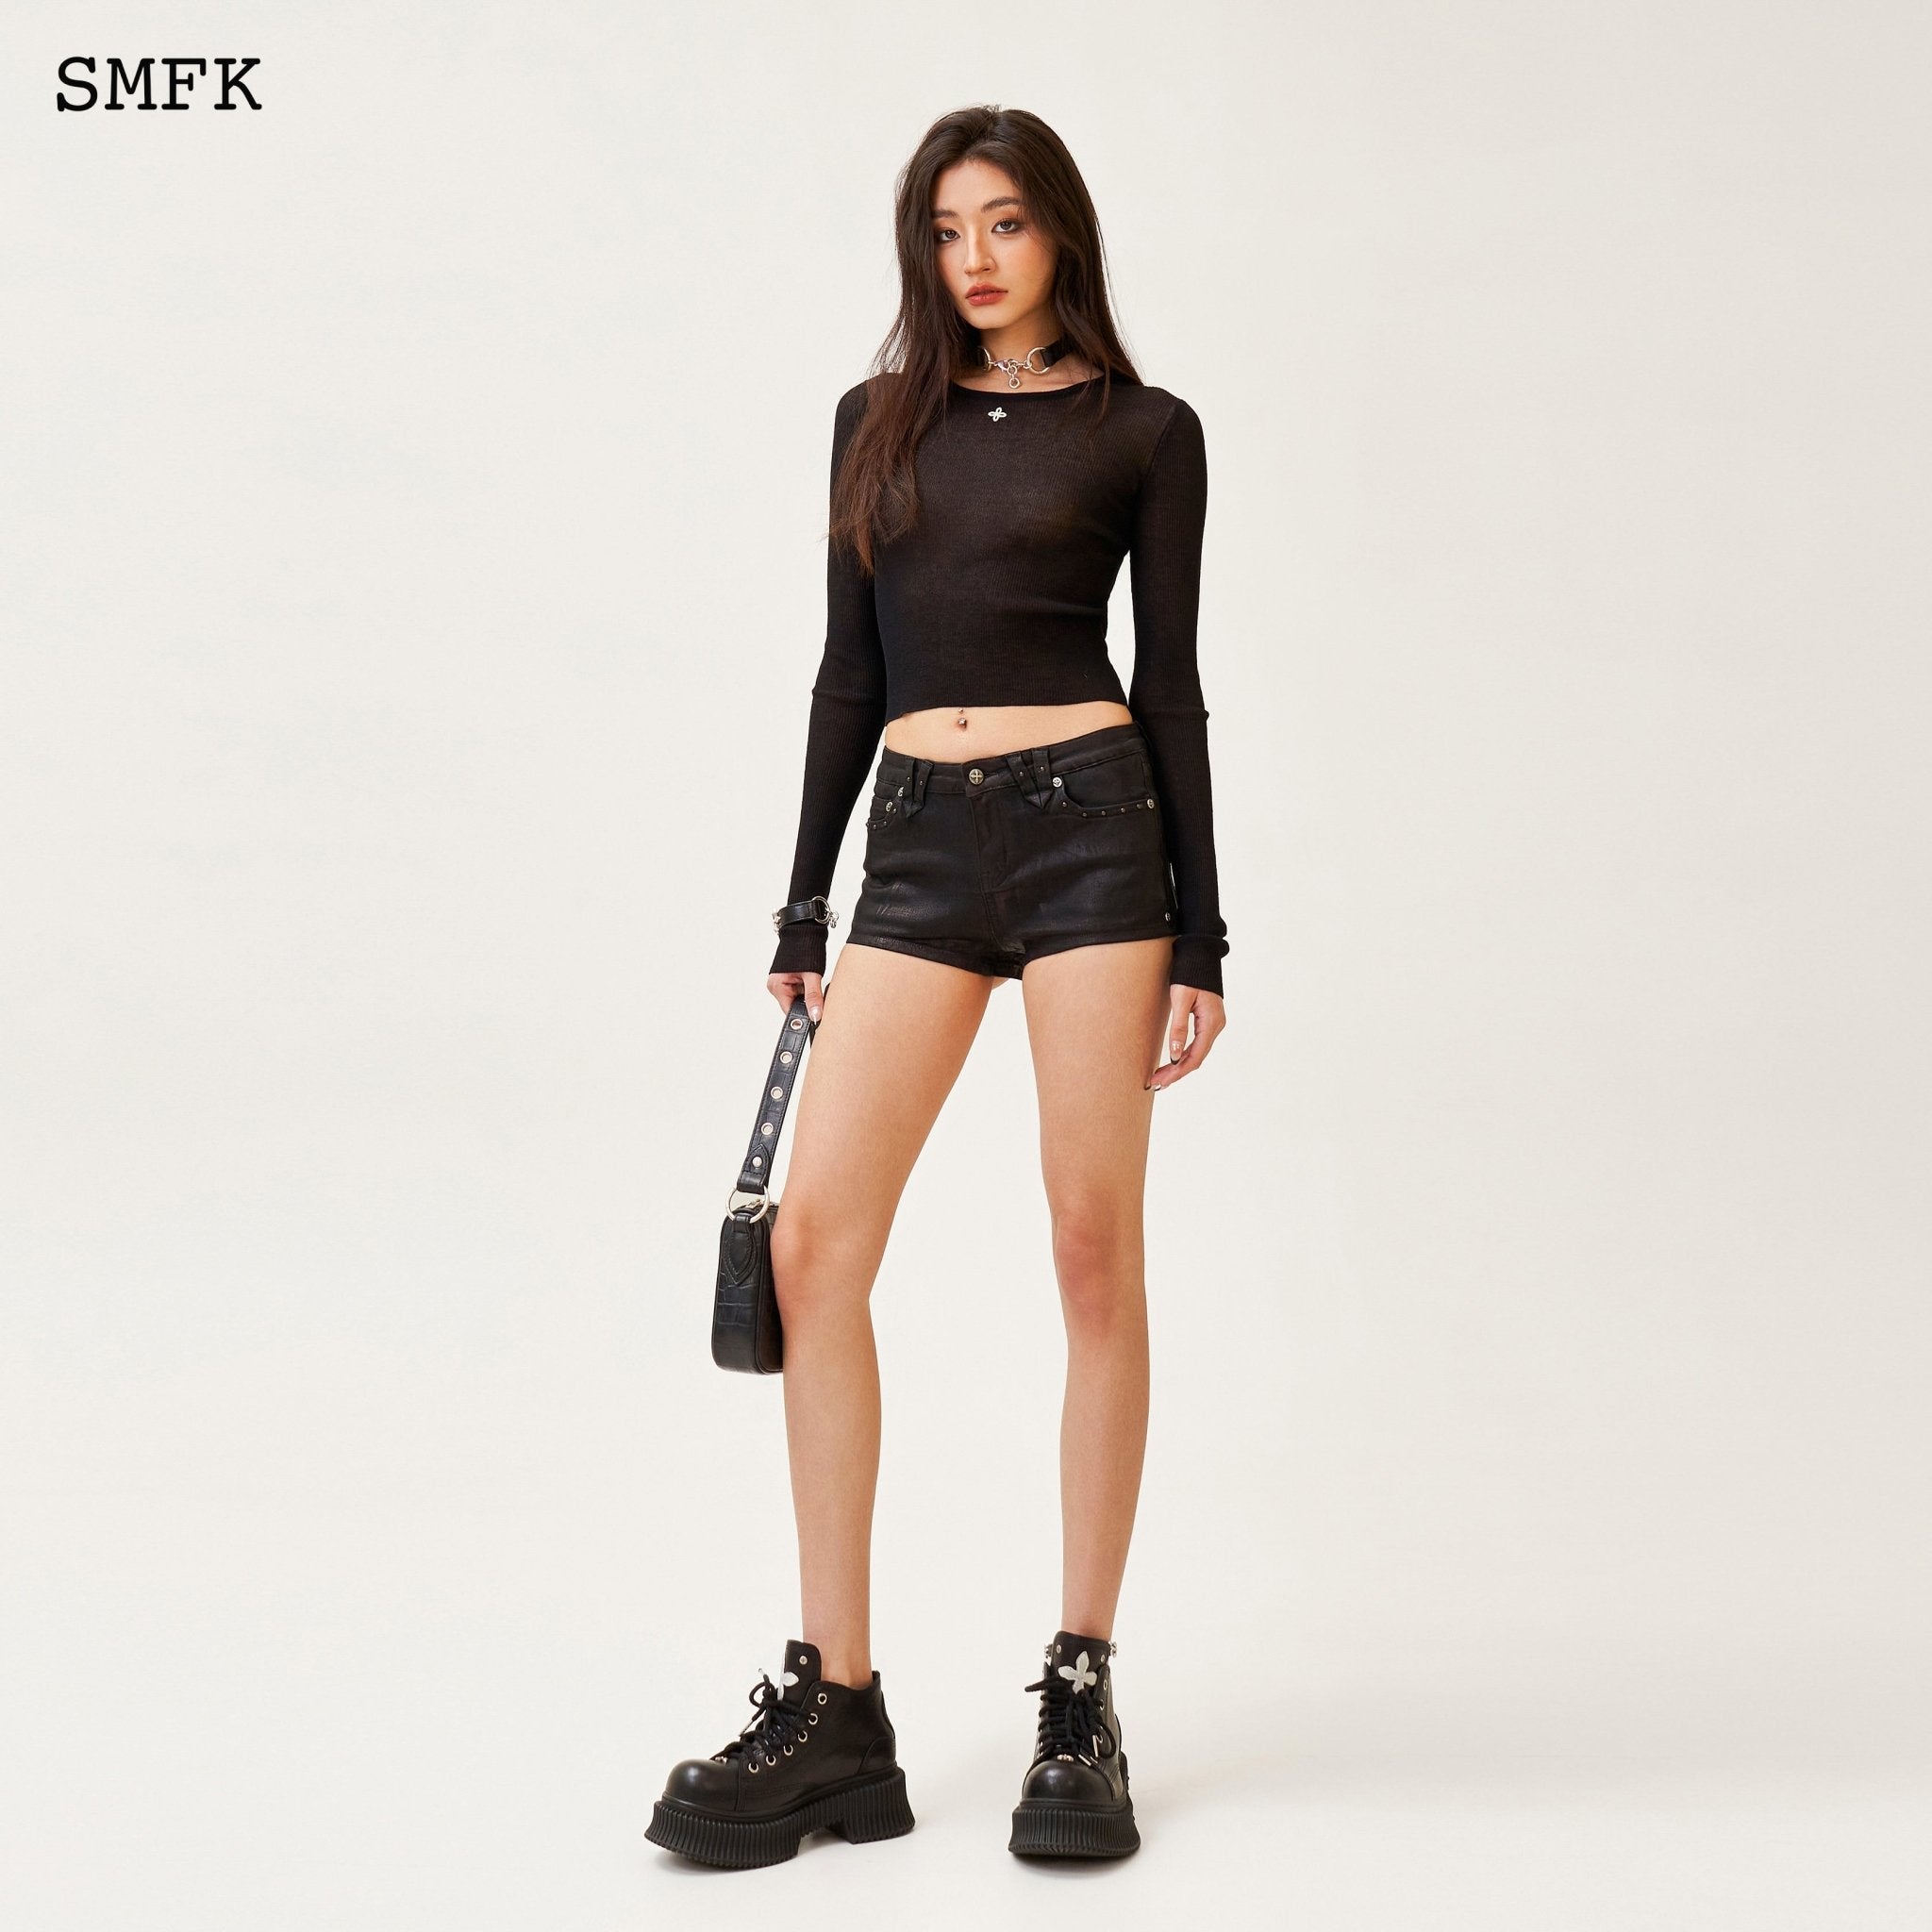 SMFK Compass Cross Low-Top Black Desert Boots | MADA IN CHINA